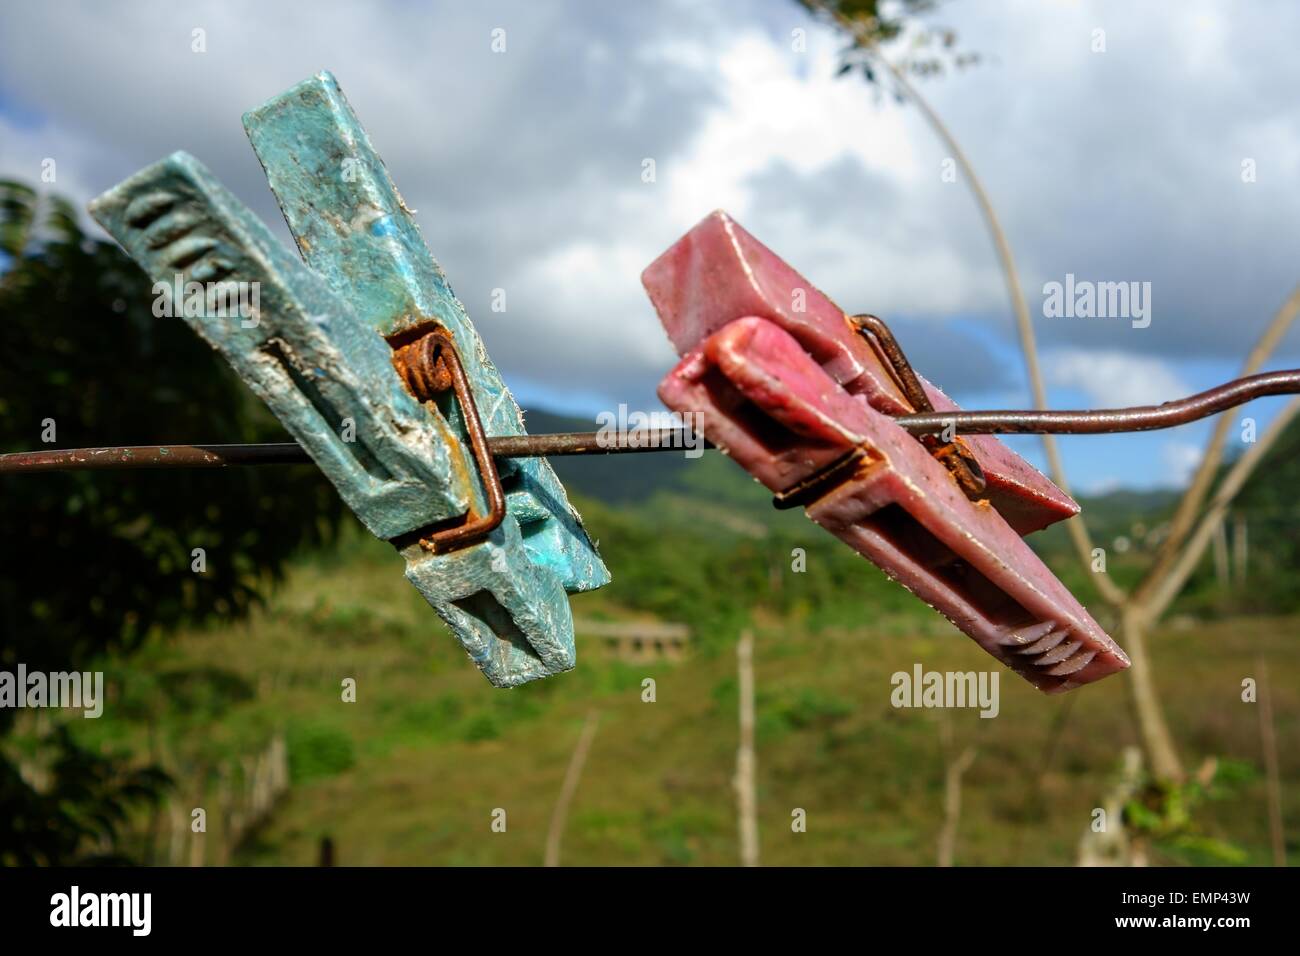 Two aged clothespin as friends on a clothes line Stock Photo